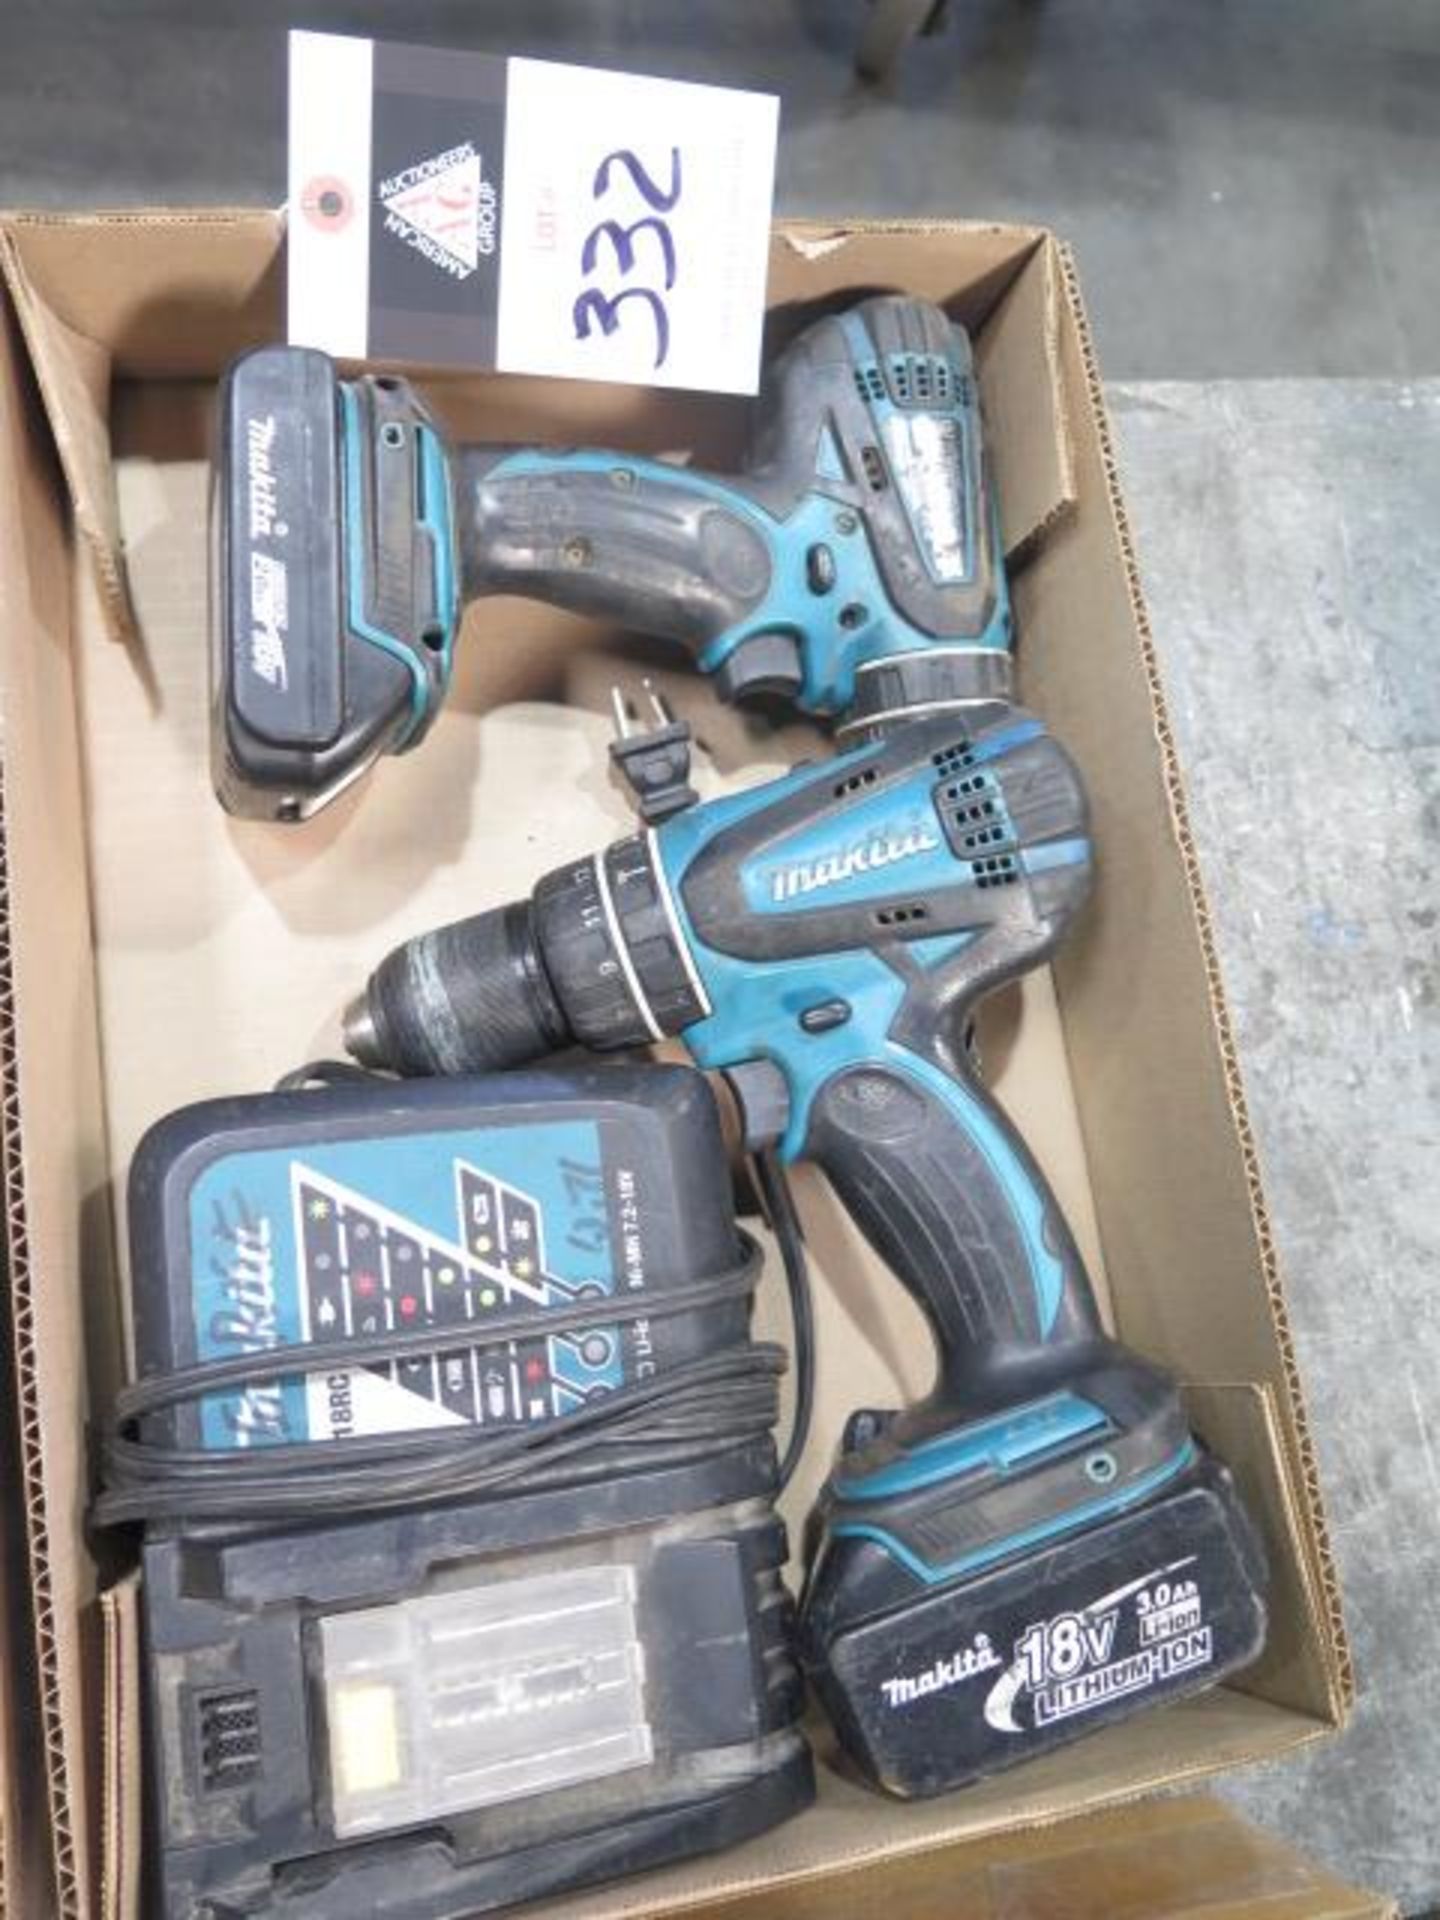 Makita 18V Cordless Drills (2) w/ Charger (SOLD AS-IS - NO WARRANTY)